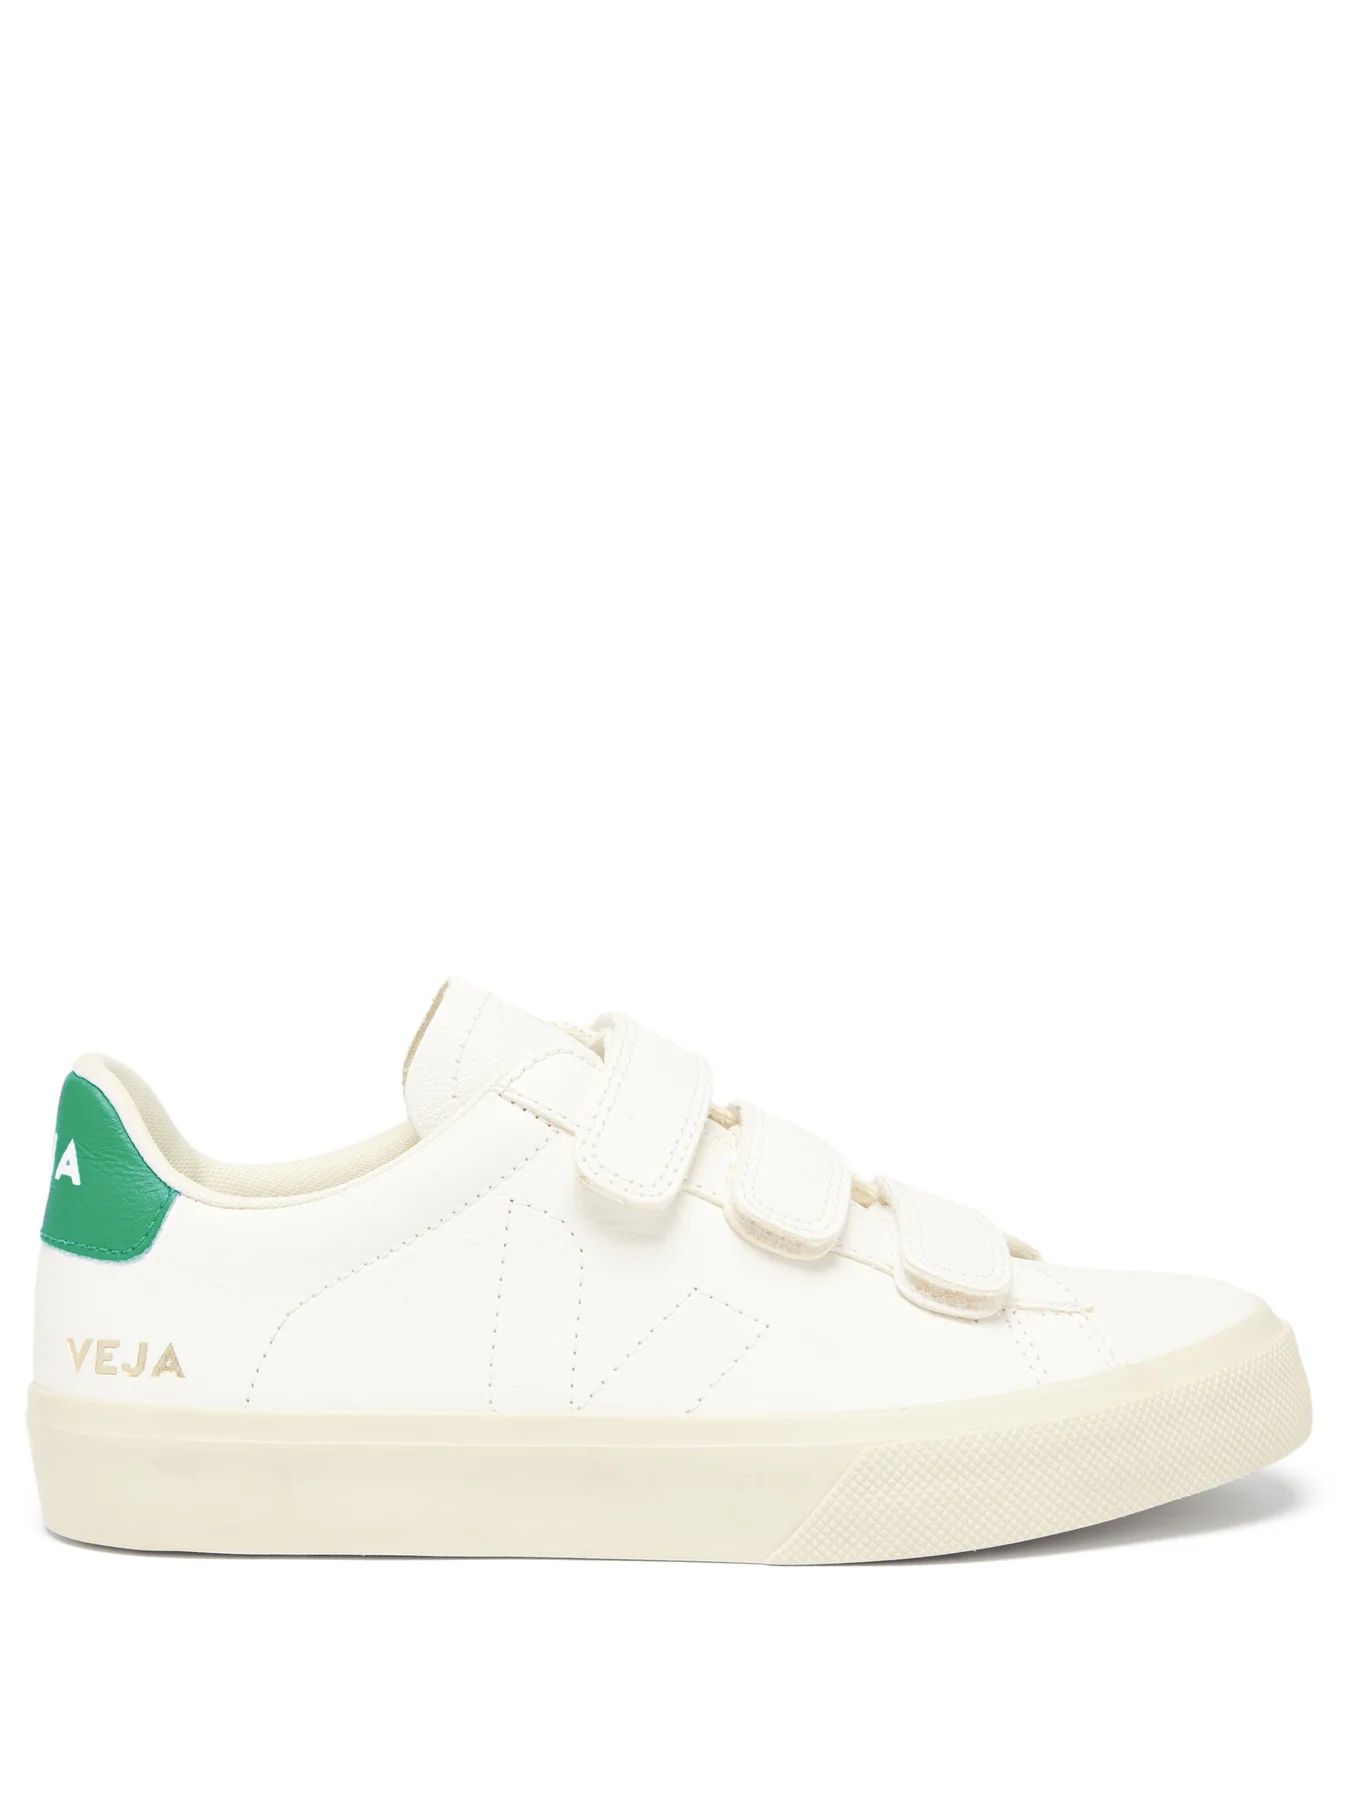 Recife velcro-strap leather trainers | Veja | Matches (US)